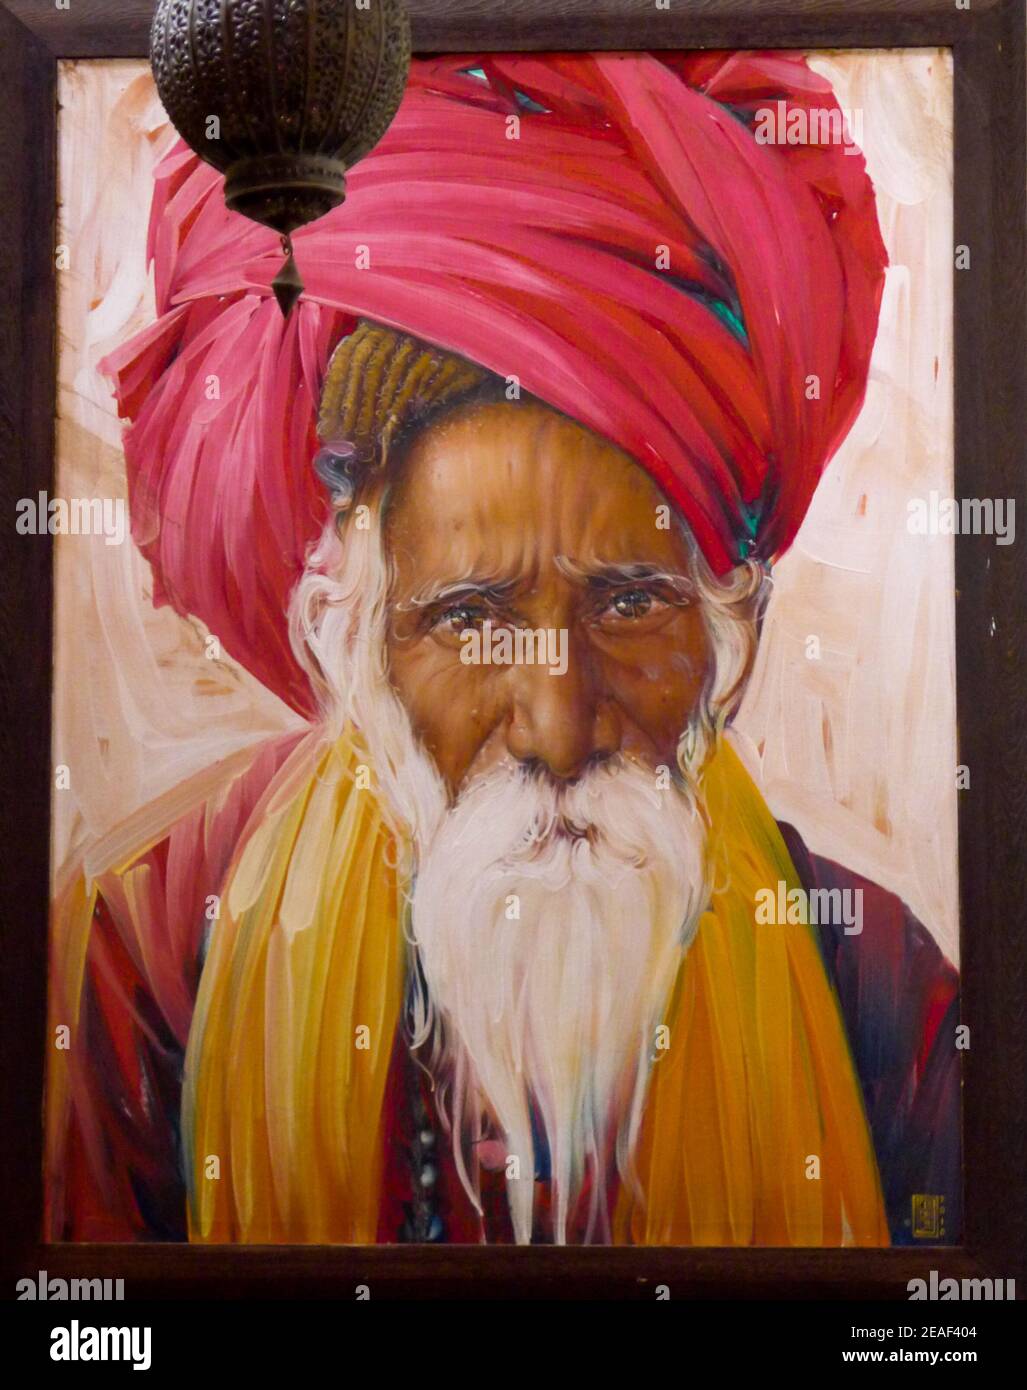 Picture of elderly Tuareg man, with a long white beard, on a Marrakesh cafe wall. Wearing a reddish turban. Marrakesh, Morocco. Stock Photo